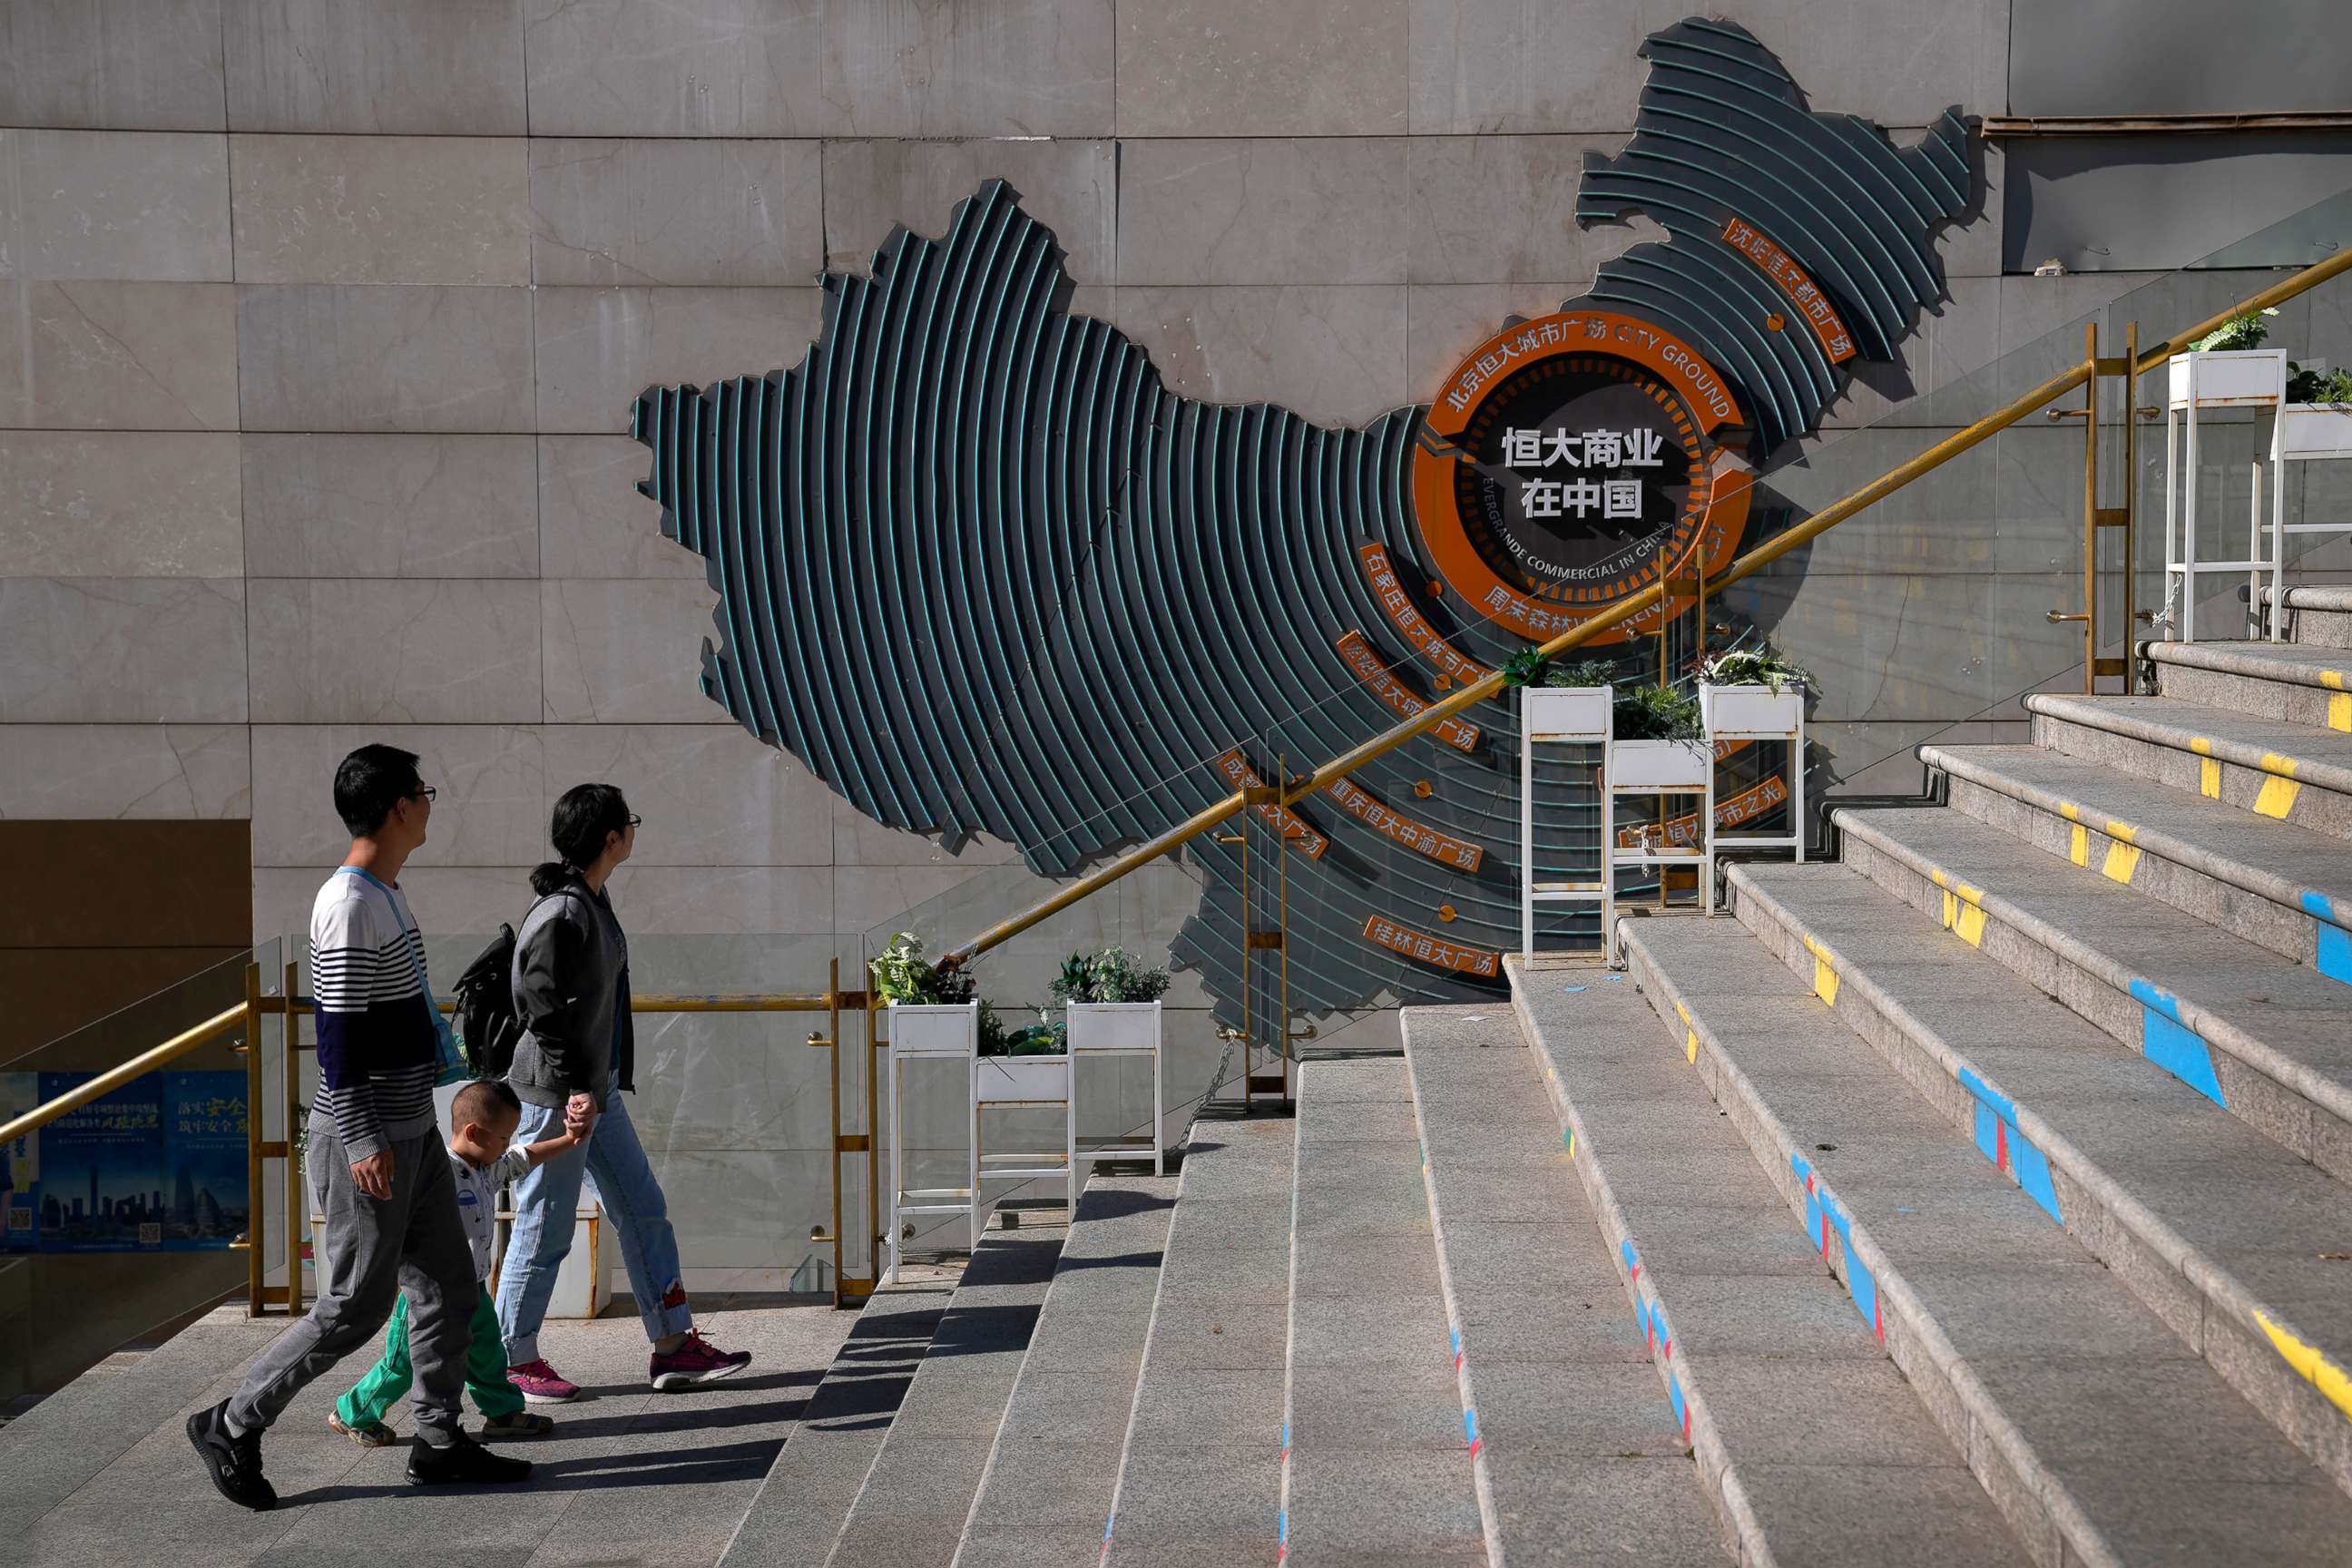 PHOTO: A family walks by a map showing Evergrande development projects in China at an Evergrande city plaza in Beijing, Sept. 21, 2021.